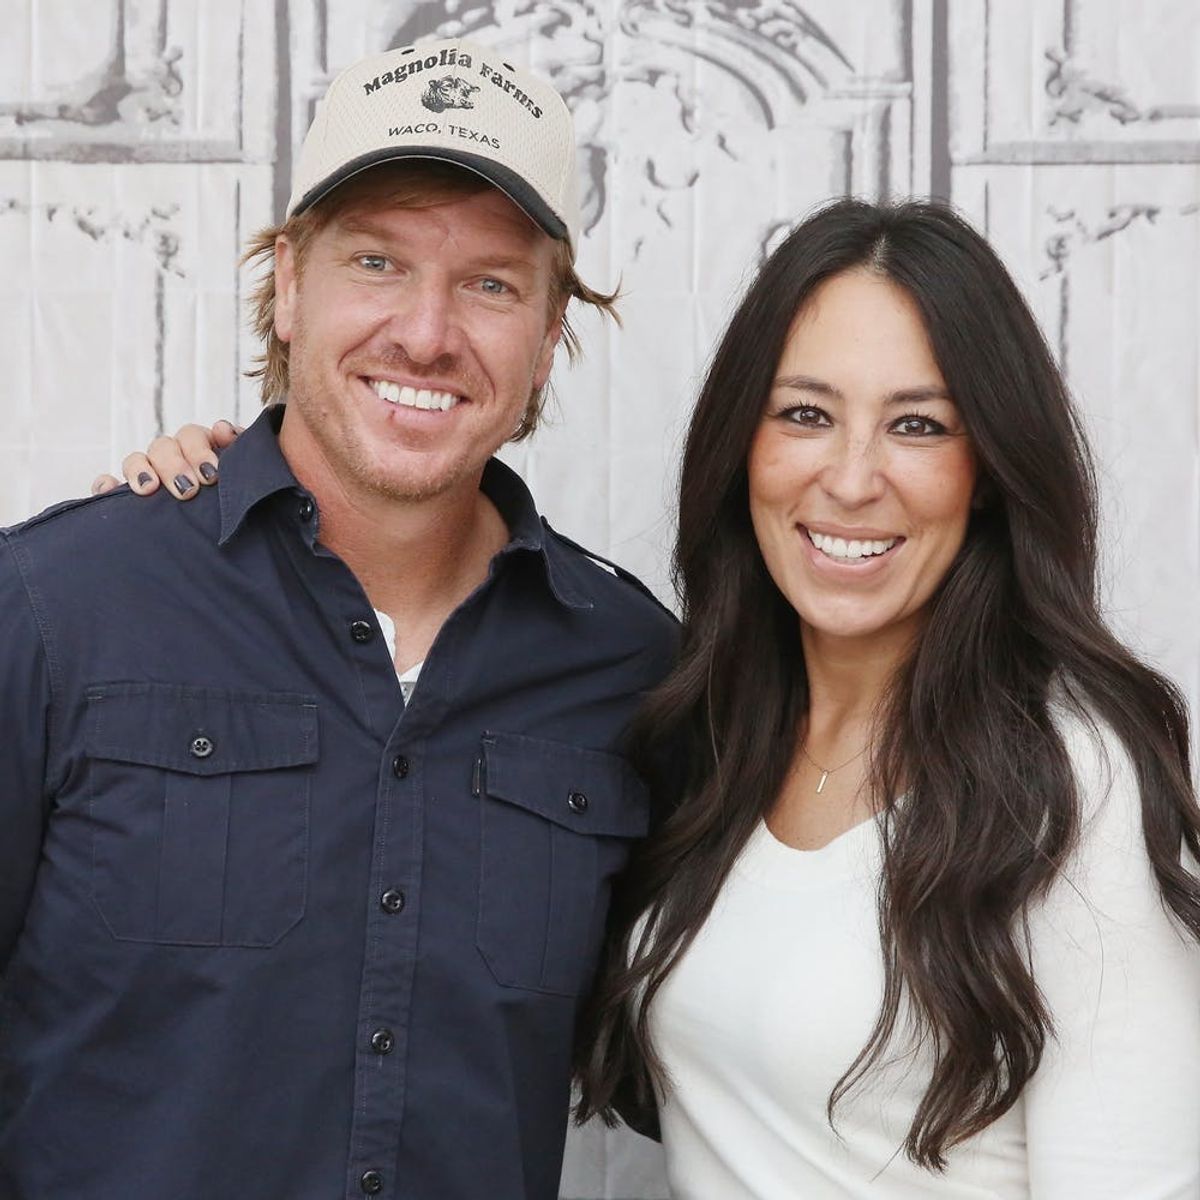 Chip and Joanna Gaines’ Baby Isn’t the Only Newborn on Their Farm